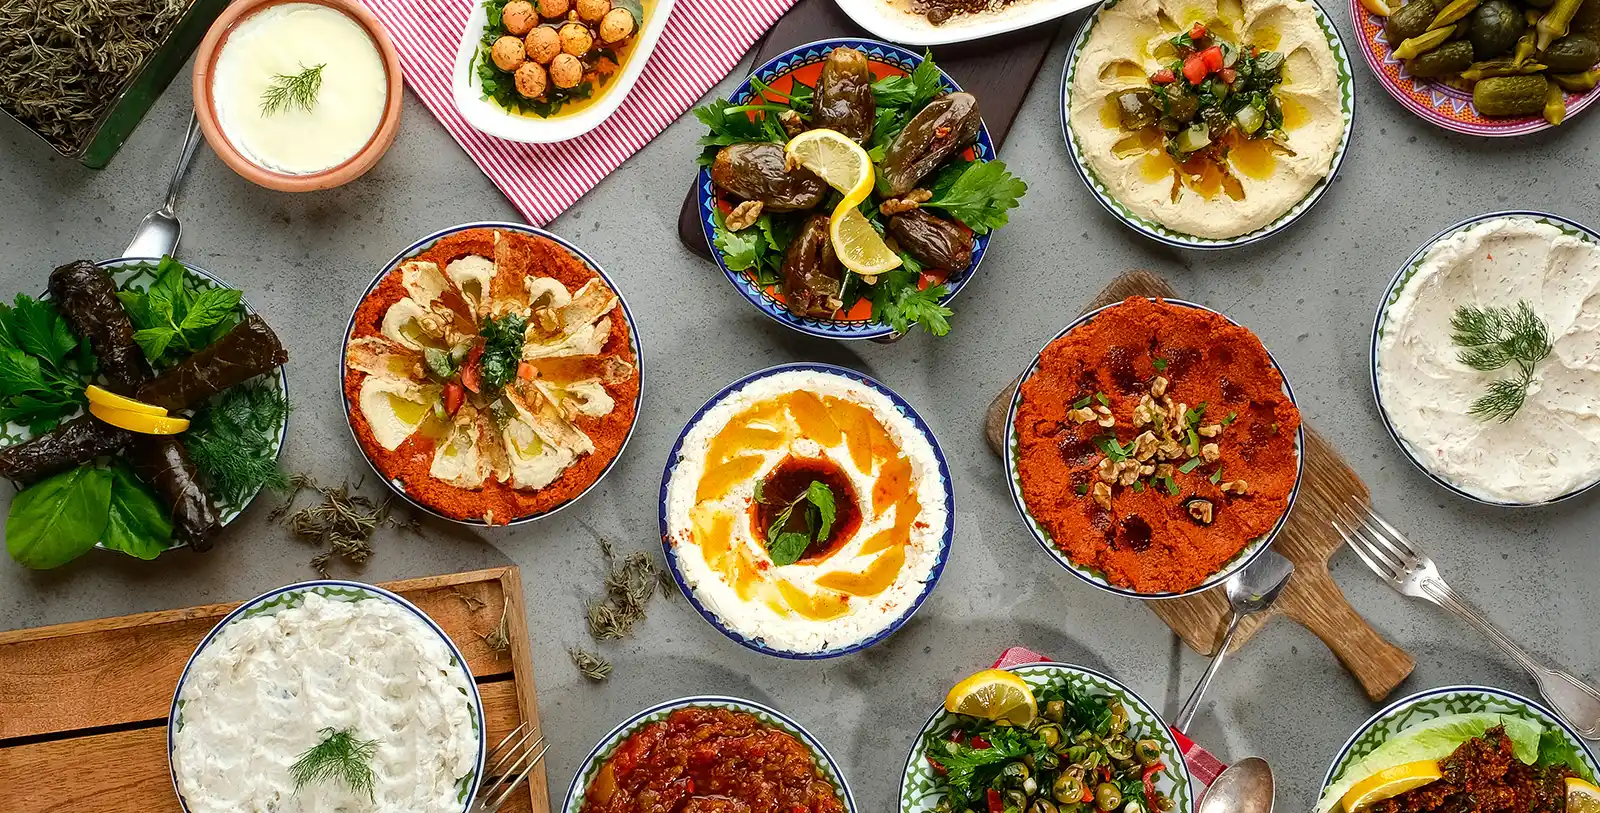 Turkish food has something to offer to people with every kind of taste and preference.